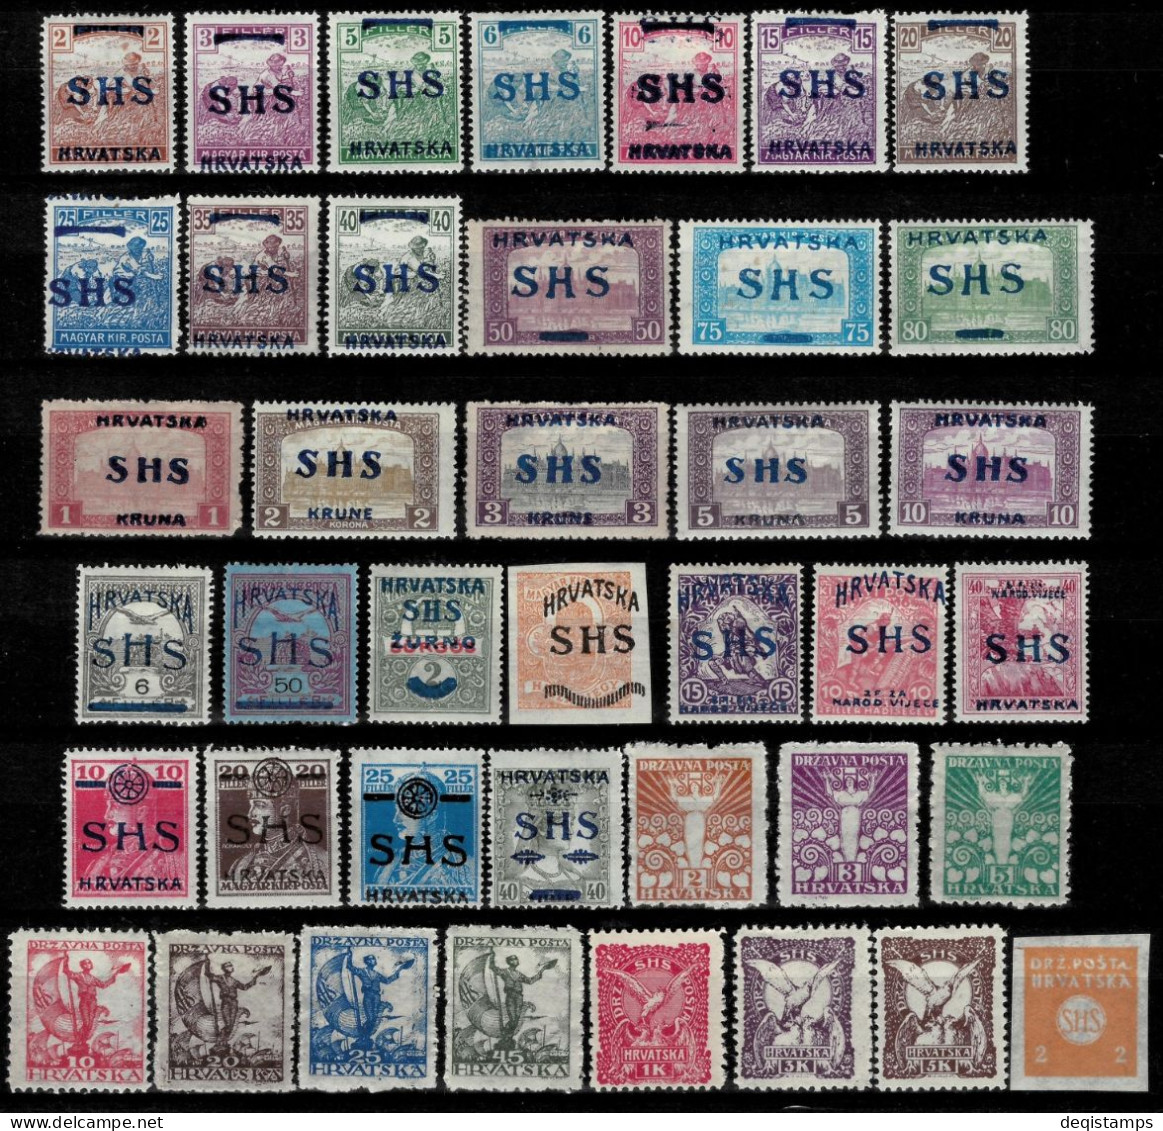 SHS - Croatia Stamps 1918/19  Hungary Stamps Overprinted  MH Sets - Neufs